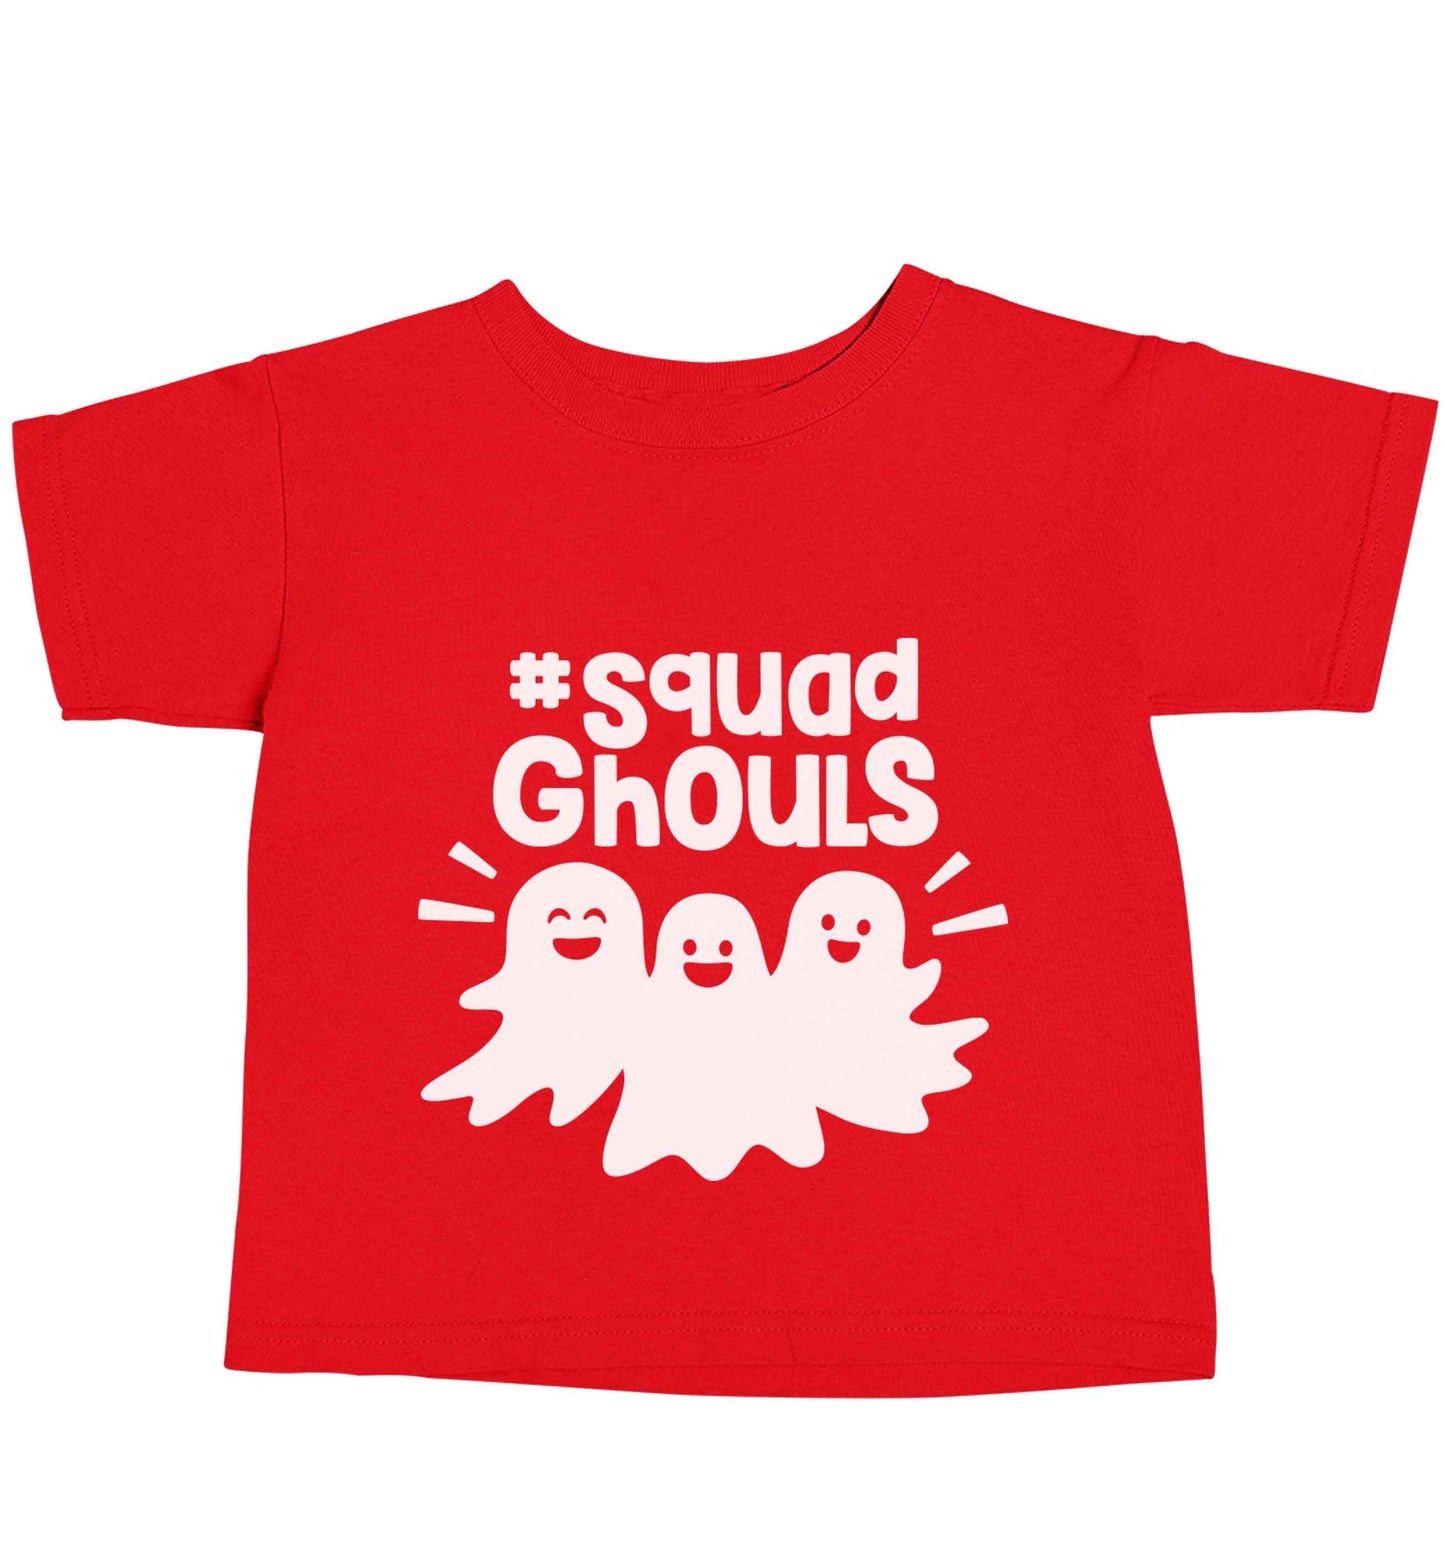 Squad ghouls Kit red baby toddler Tshirt 2 Years